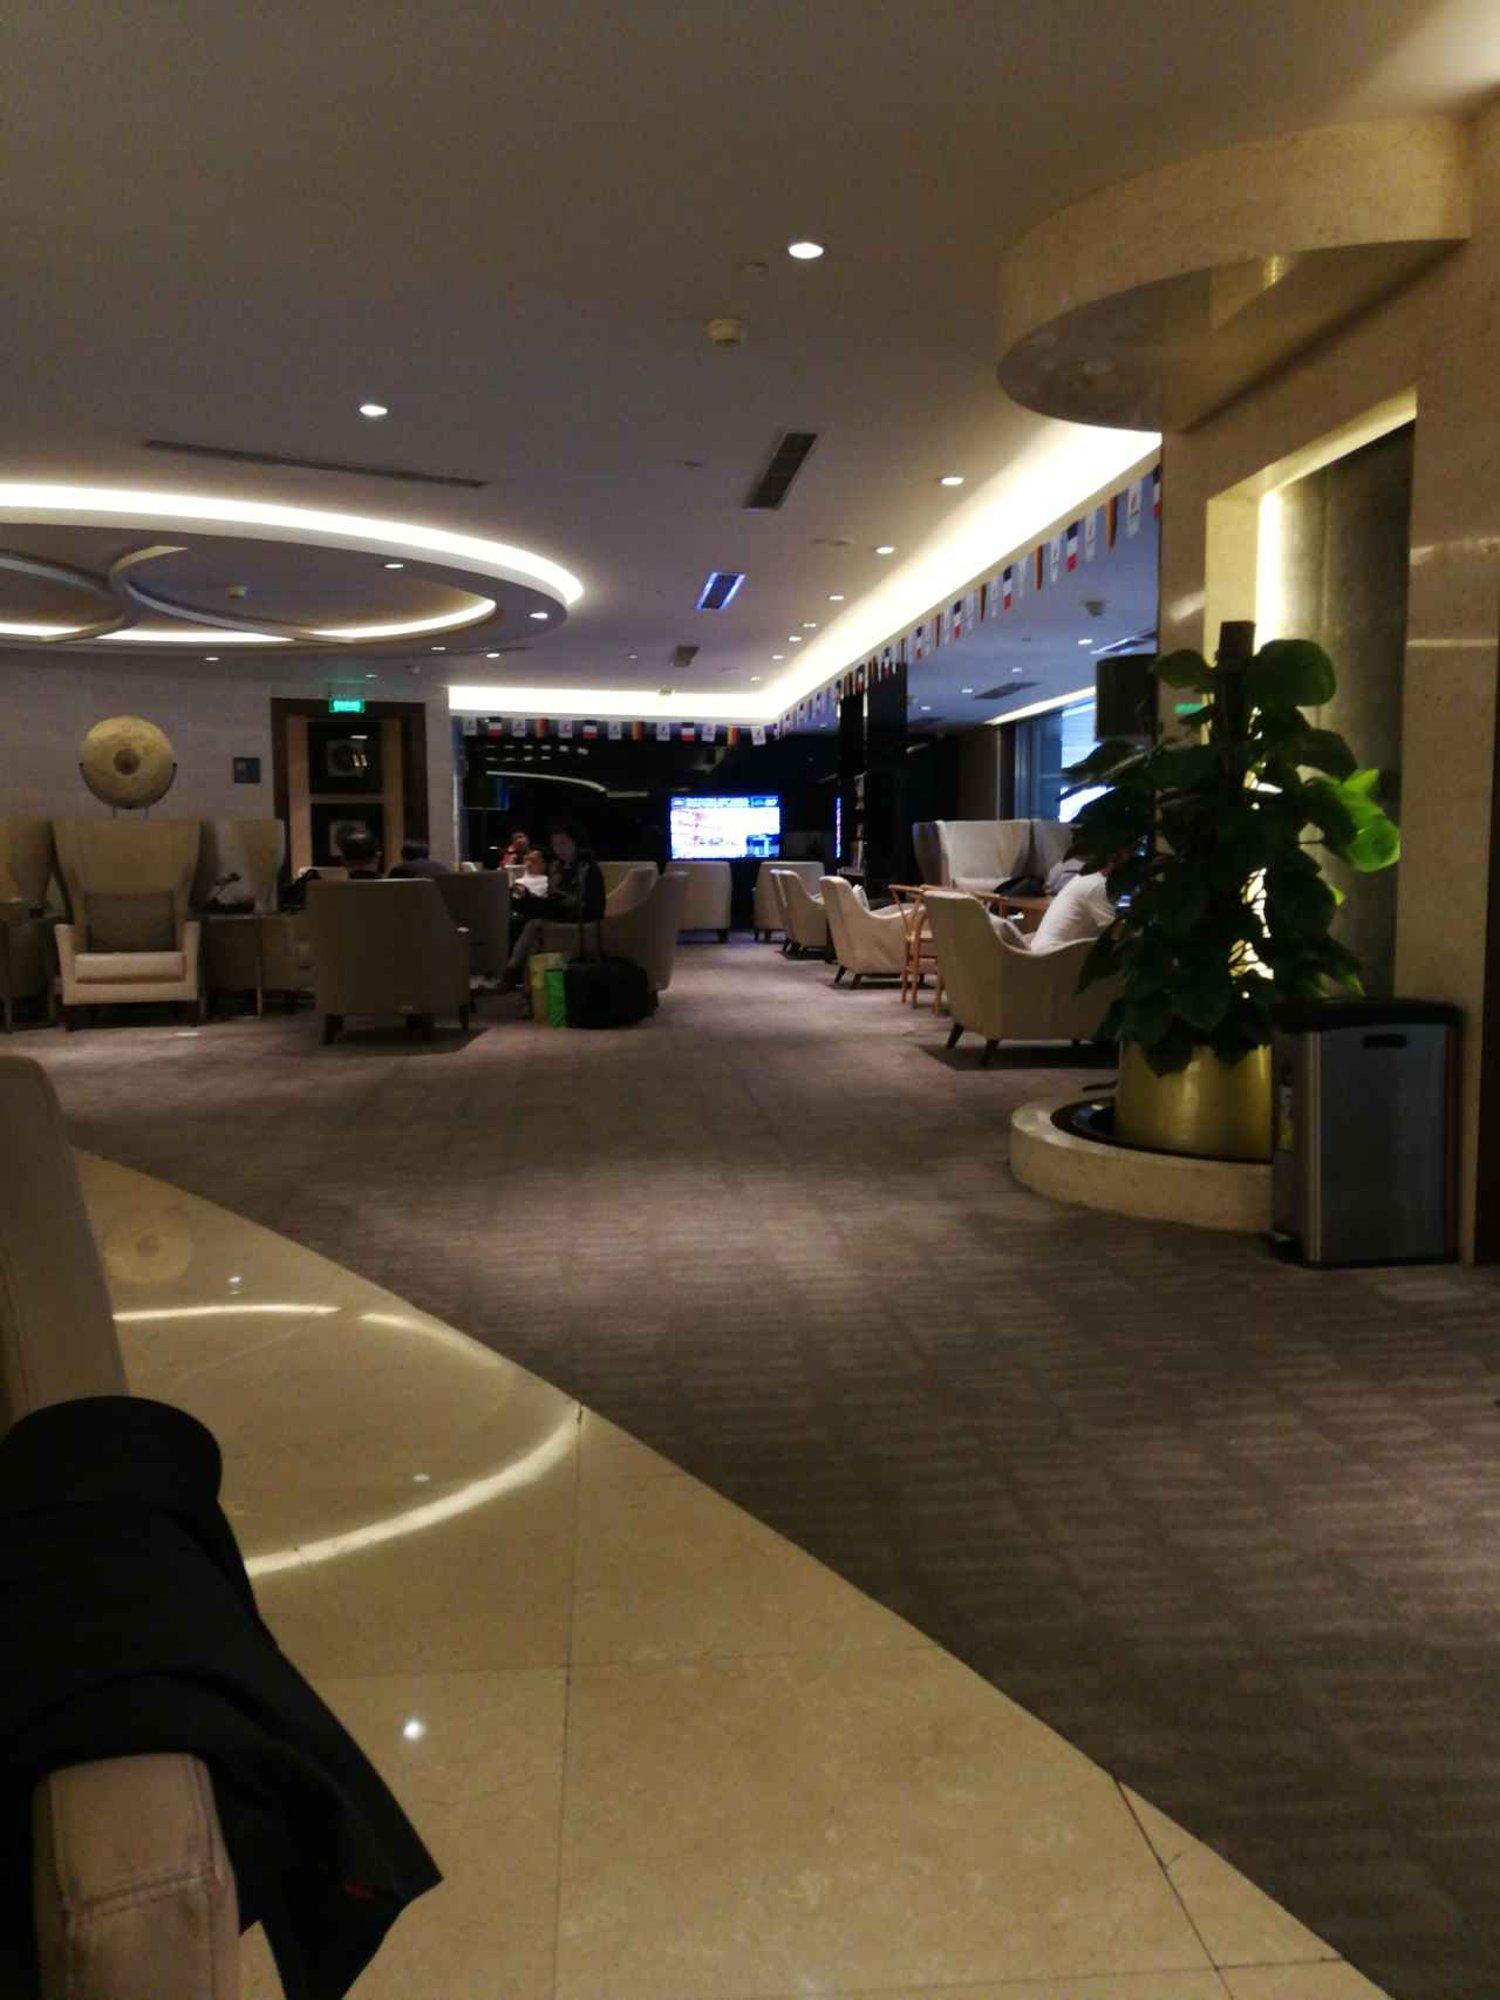 Air China Domestic First & Business Class Lounge image 1 of 5